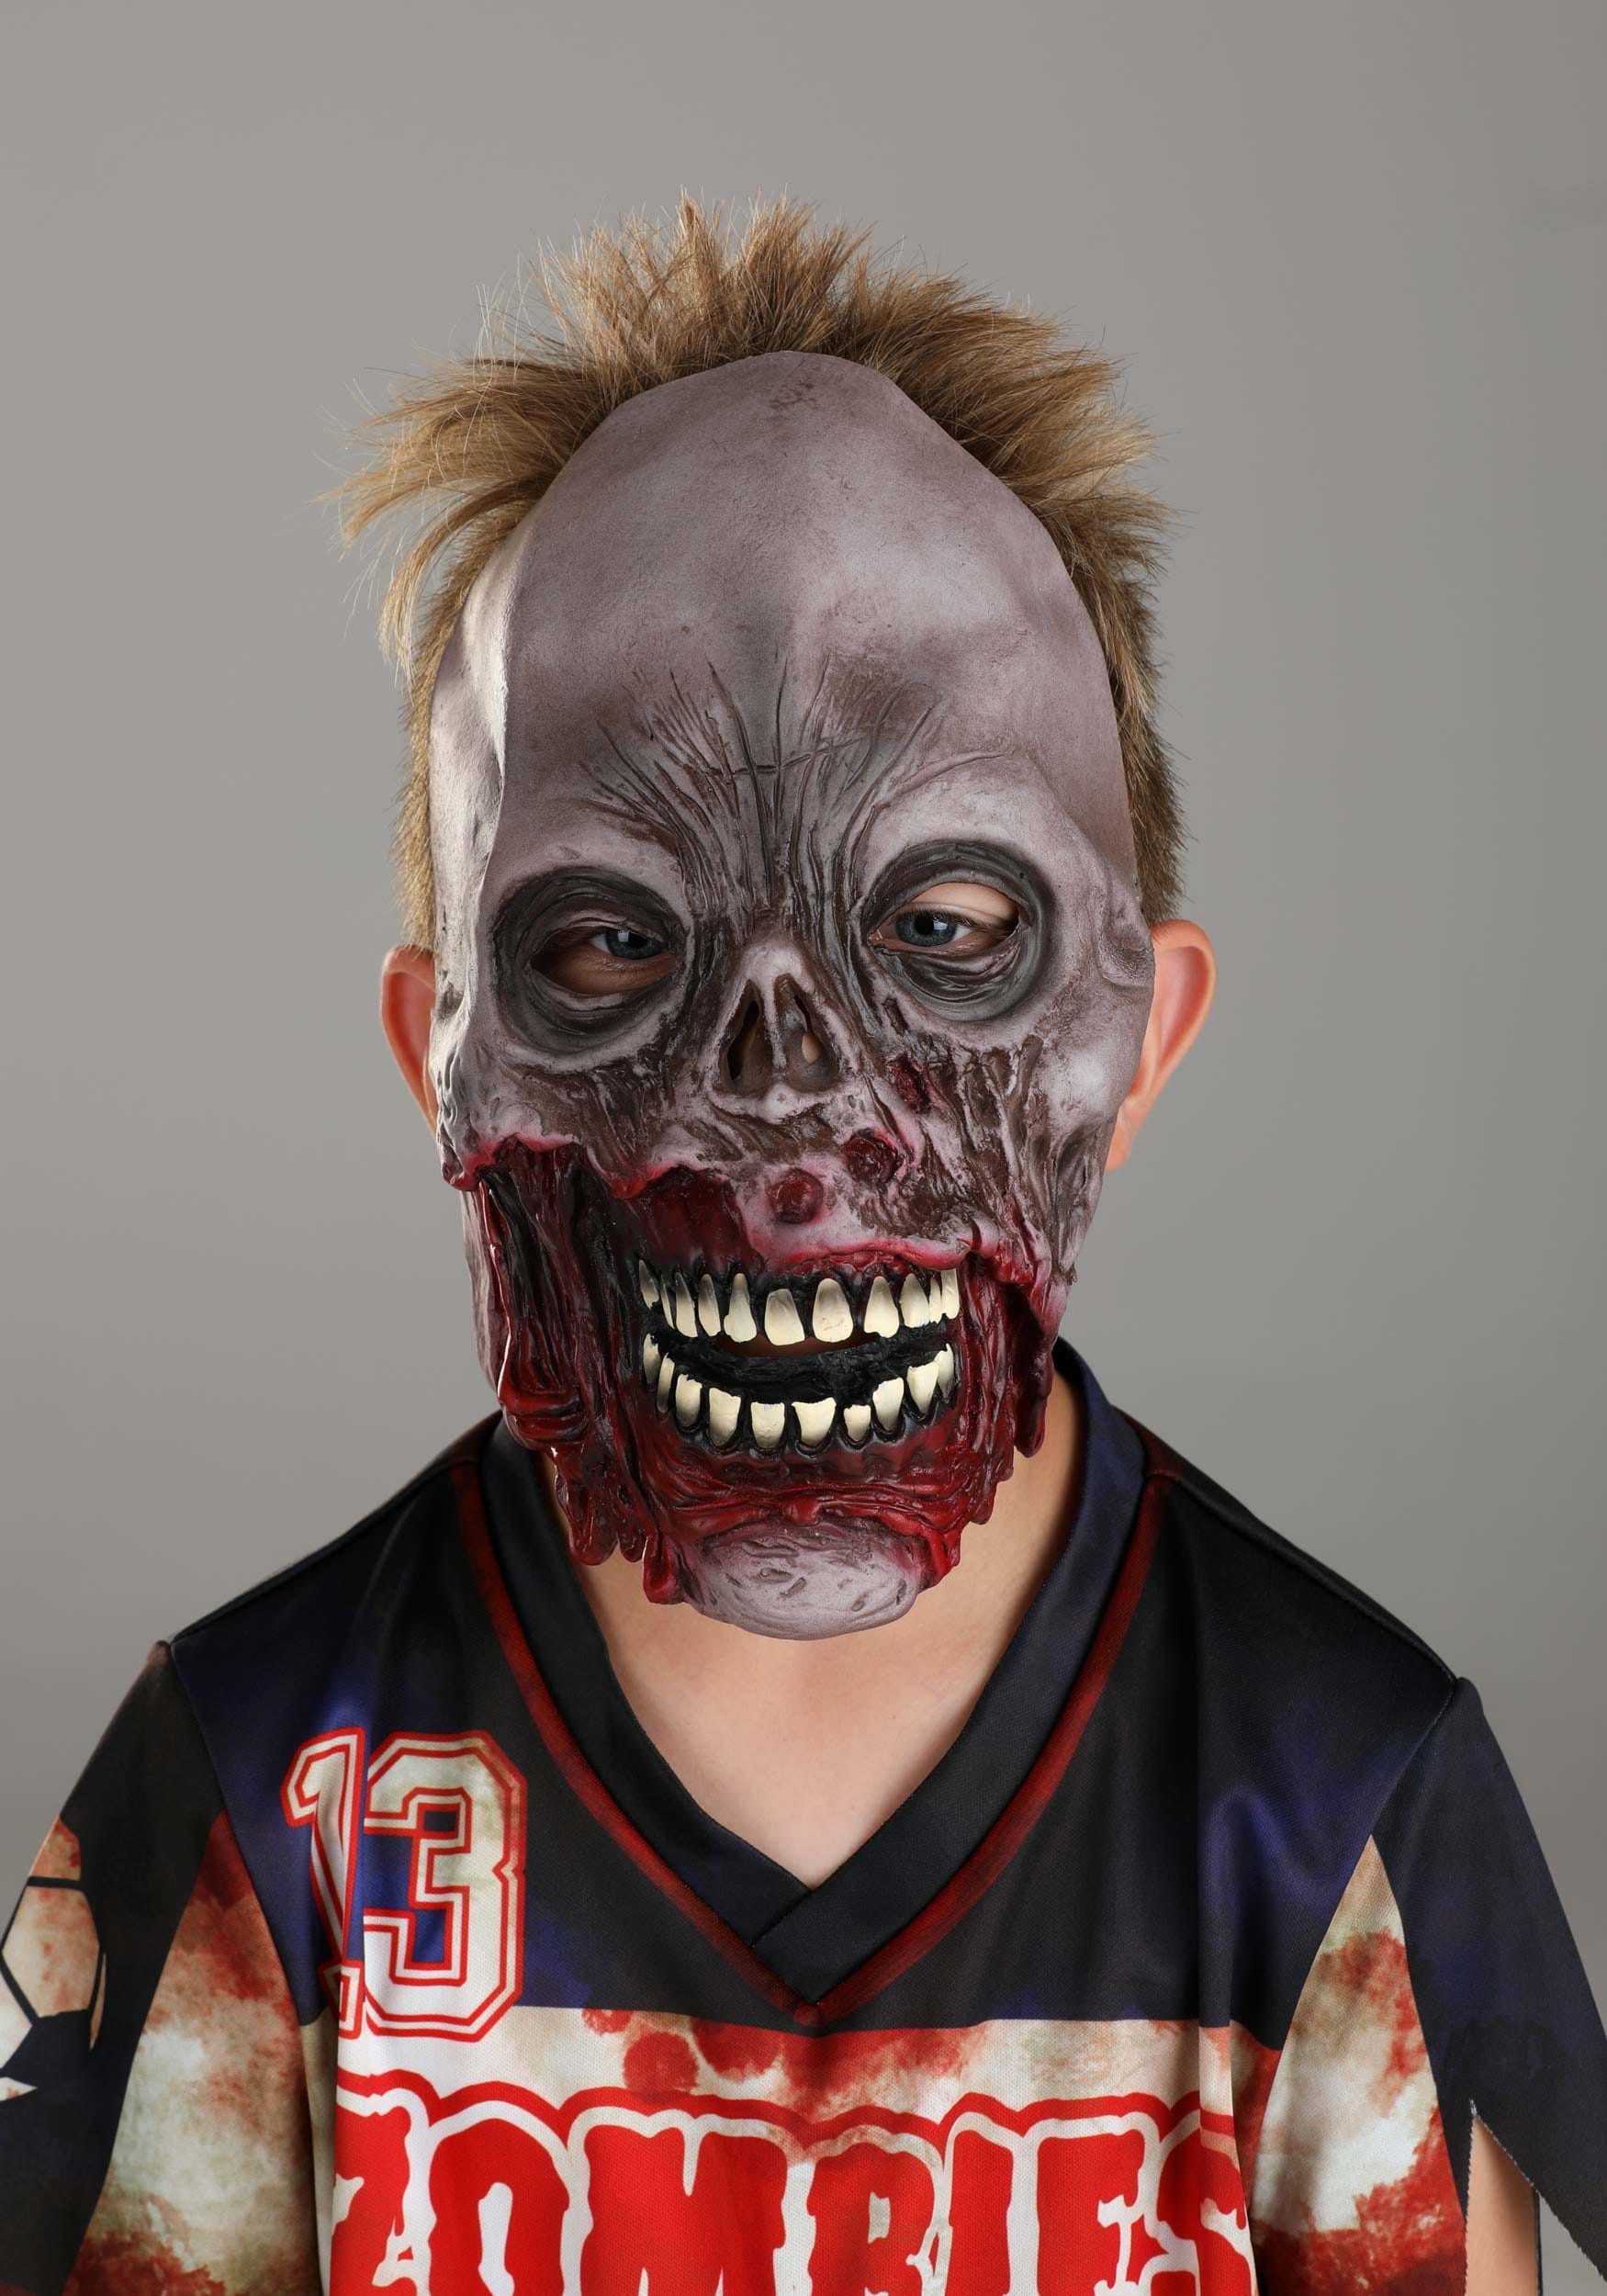 Zombie Soccer Player Kid's Costume